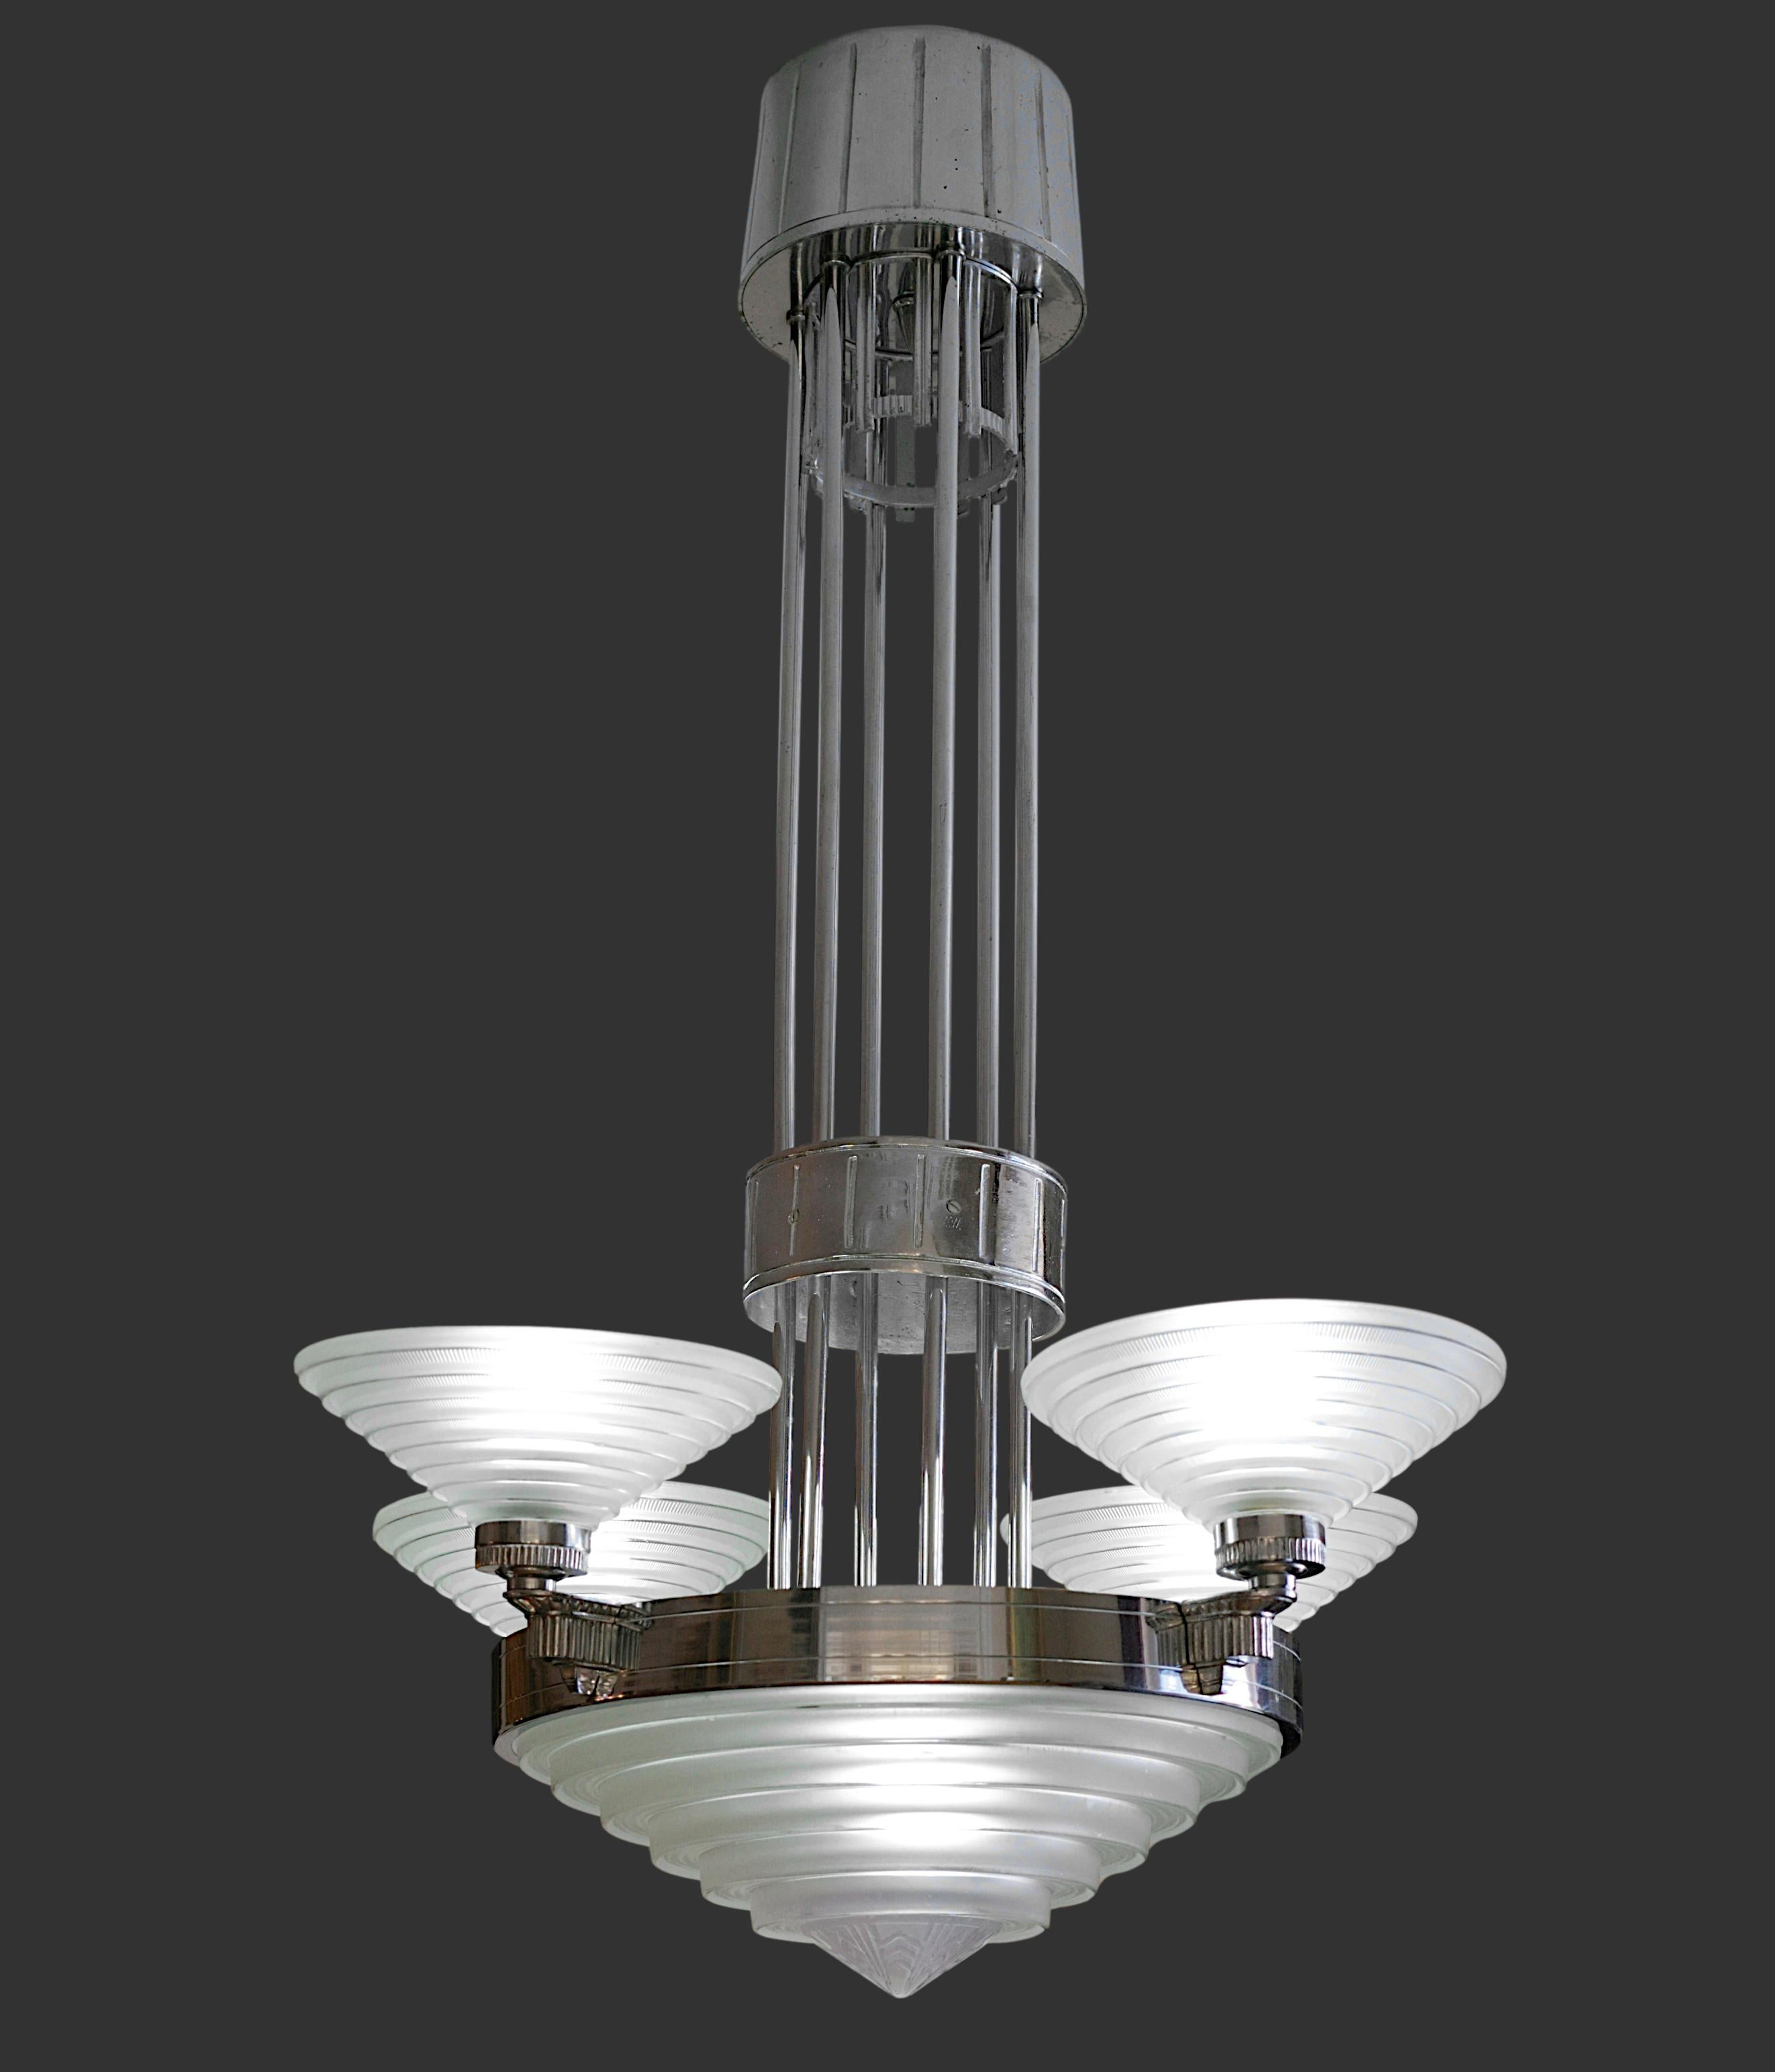 Genuine French Art Deco modernist chandelier by Georges LELEU, 53, rue Faubourg Saint-Antoine, 11e, France, 1920s. Chromed nickel and molded glass. The glass shades were made by Verrerie des Hanots. Height: 28.3